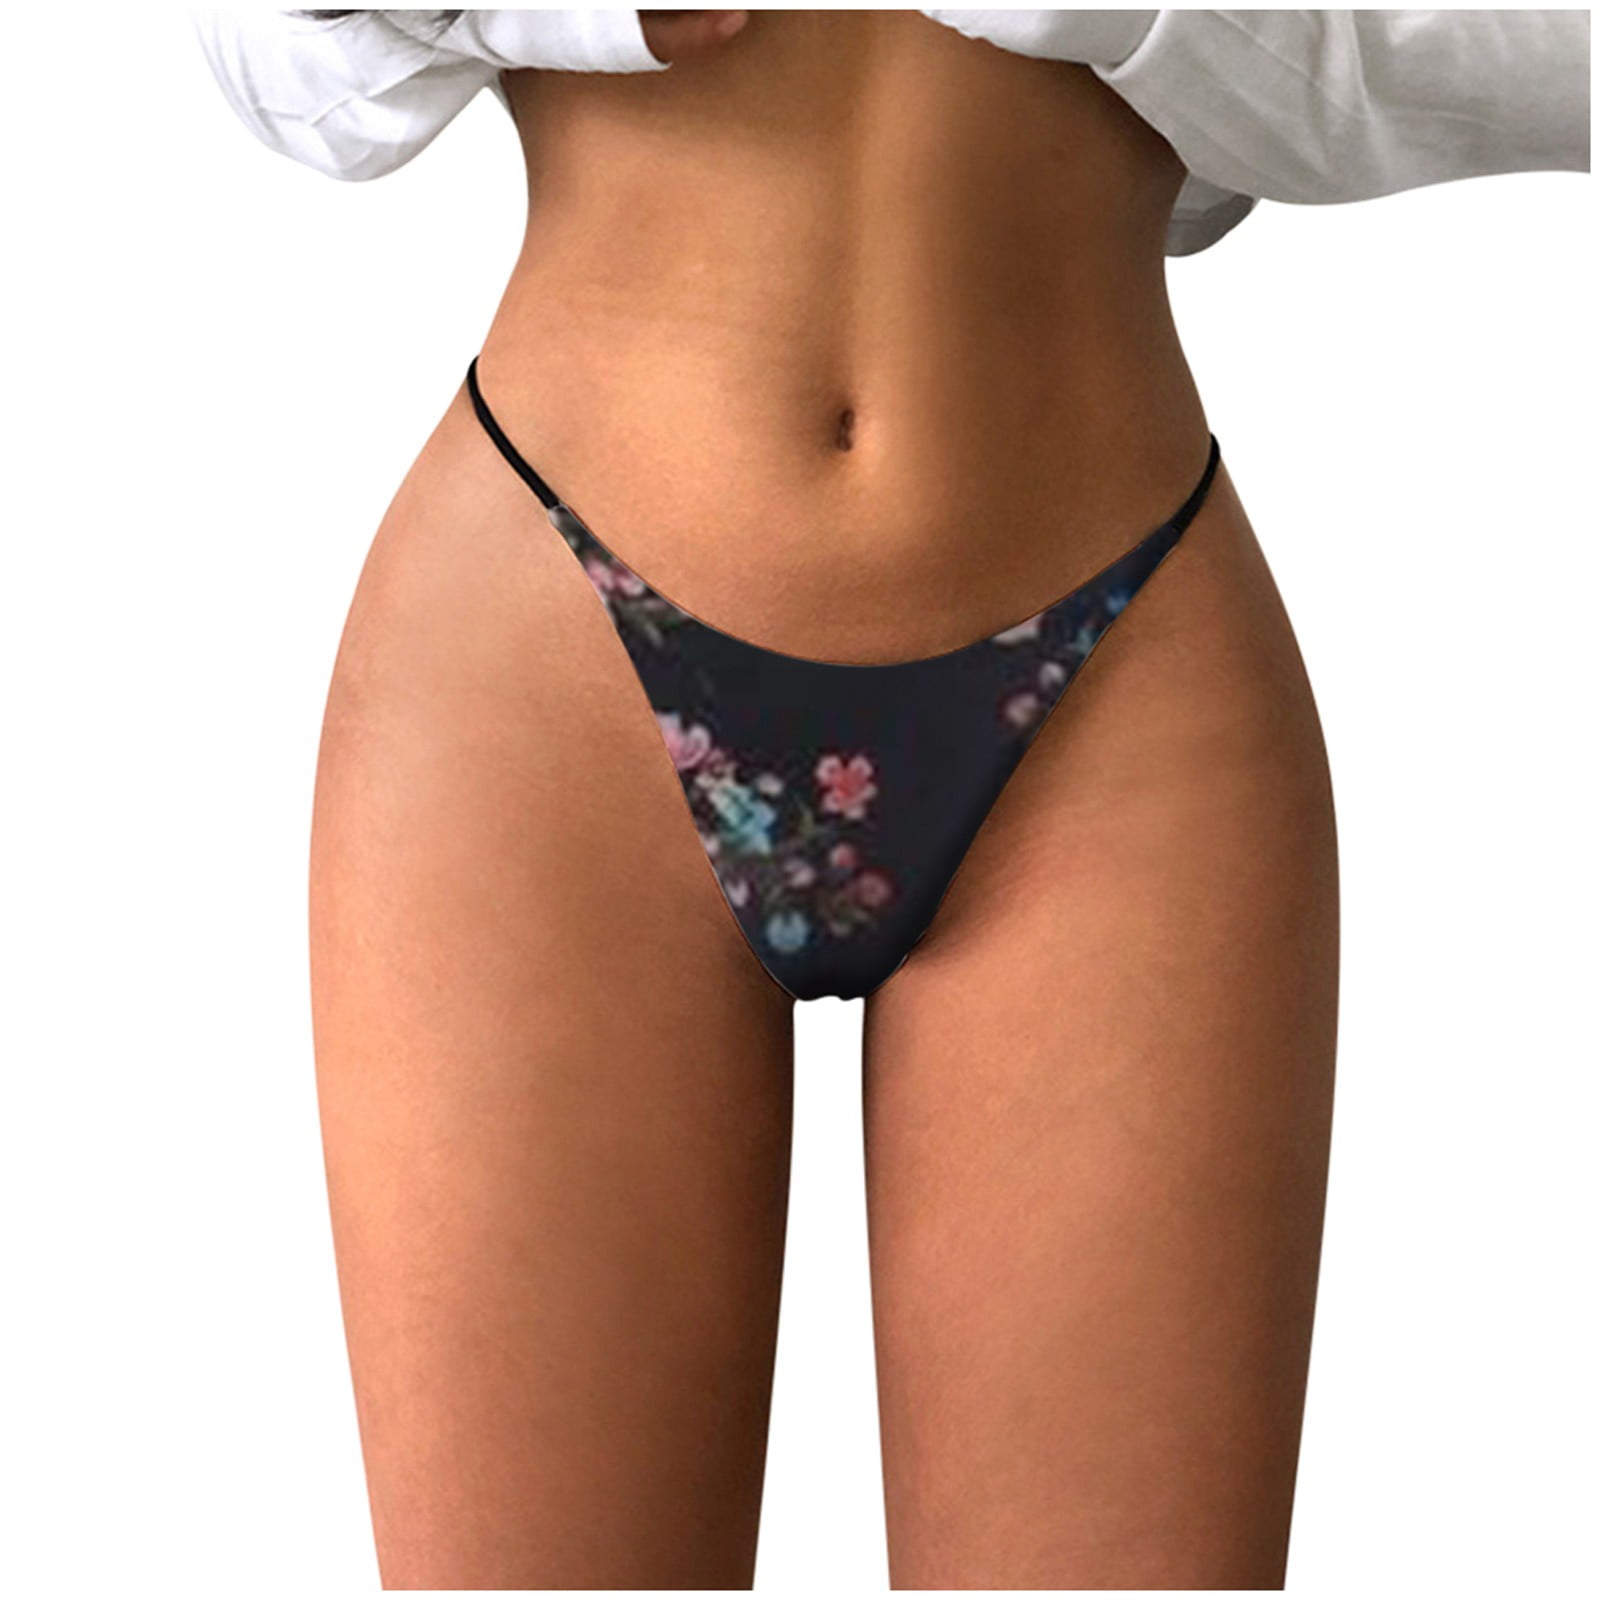 Sksloeg Thongs for Women Seamless Thongs for Women No Show Panties Stretch  Floral Printed Underwear Sexy G-String Thongs Bottom,Black L 